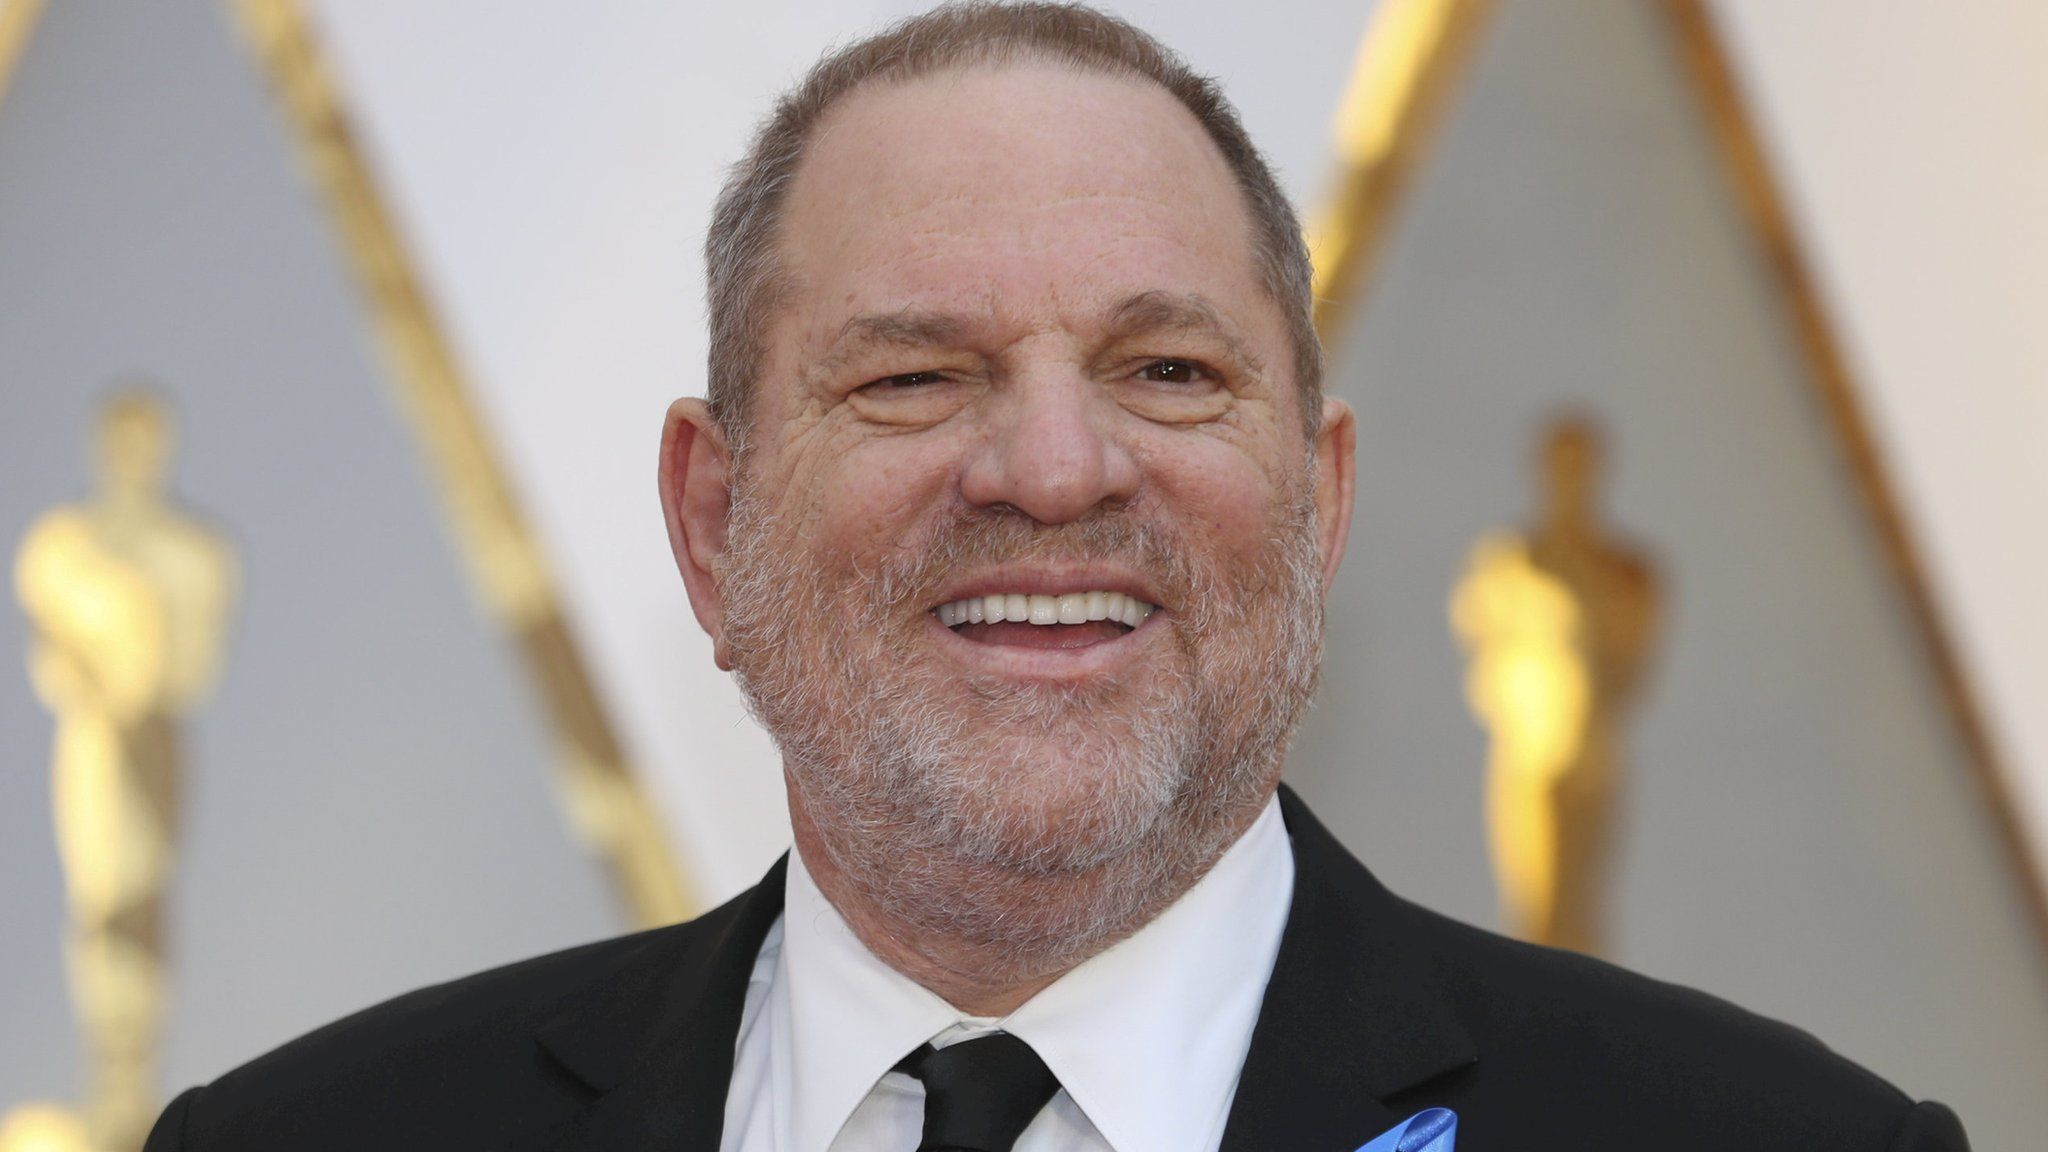 Harvey Weinstein poses on the Red Carpet after arriving at the 89th Academy Awards in Hollywood, California, February 26, 2017